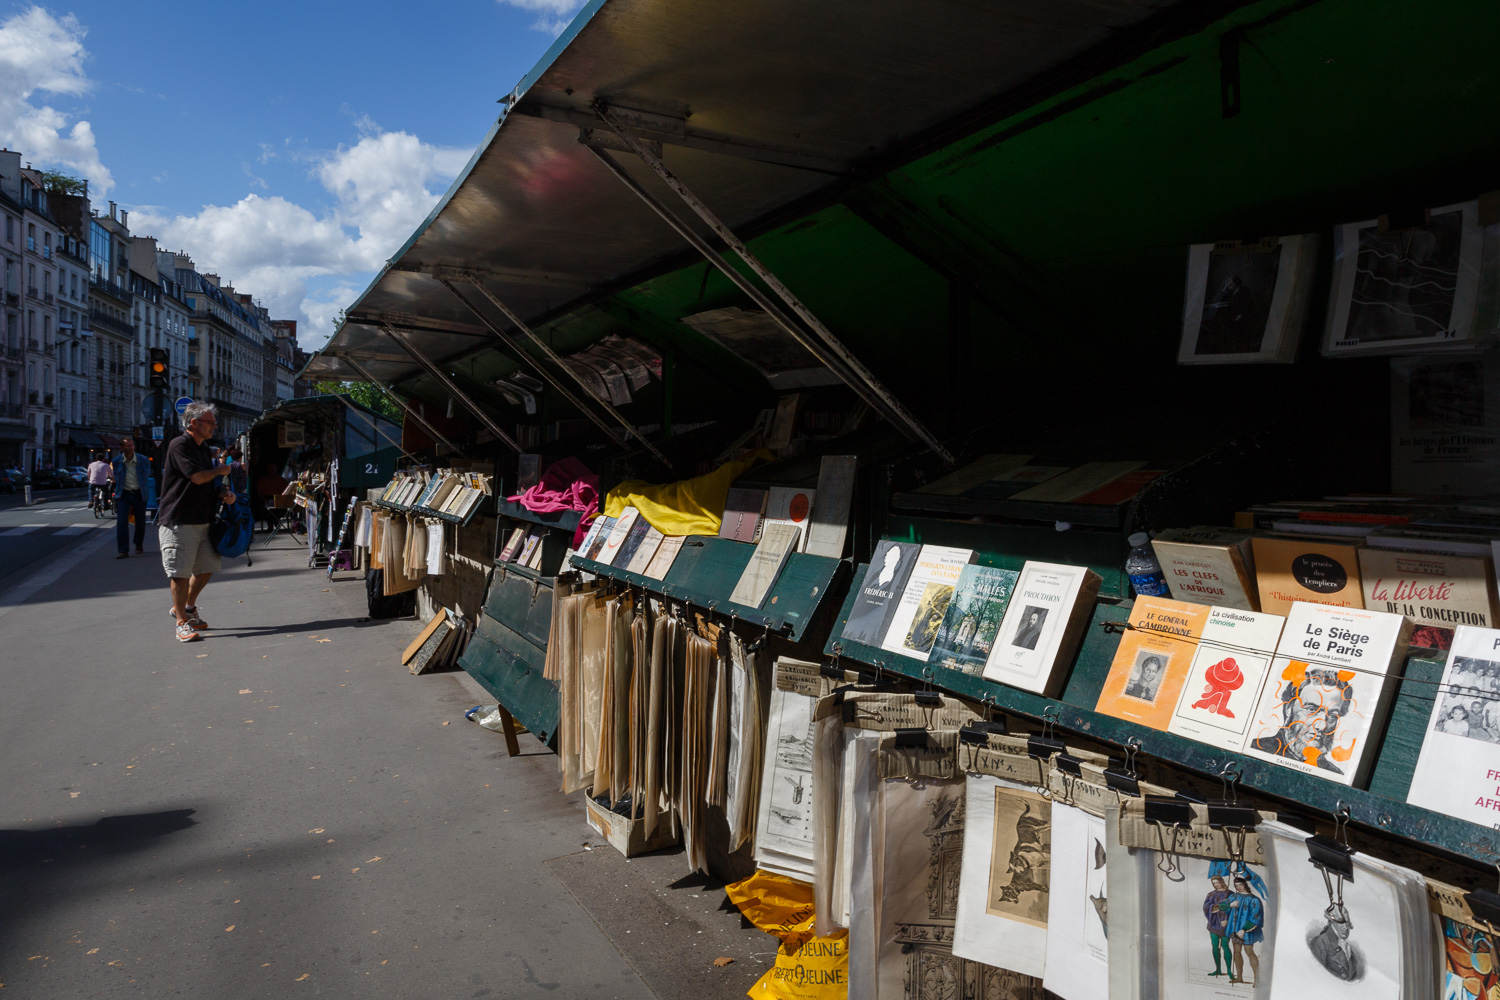 Bouquiniste booksellers along the Seine River in Paris